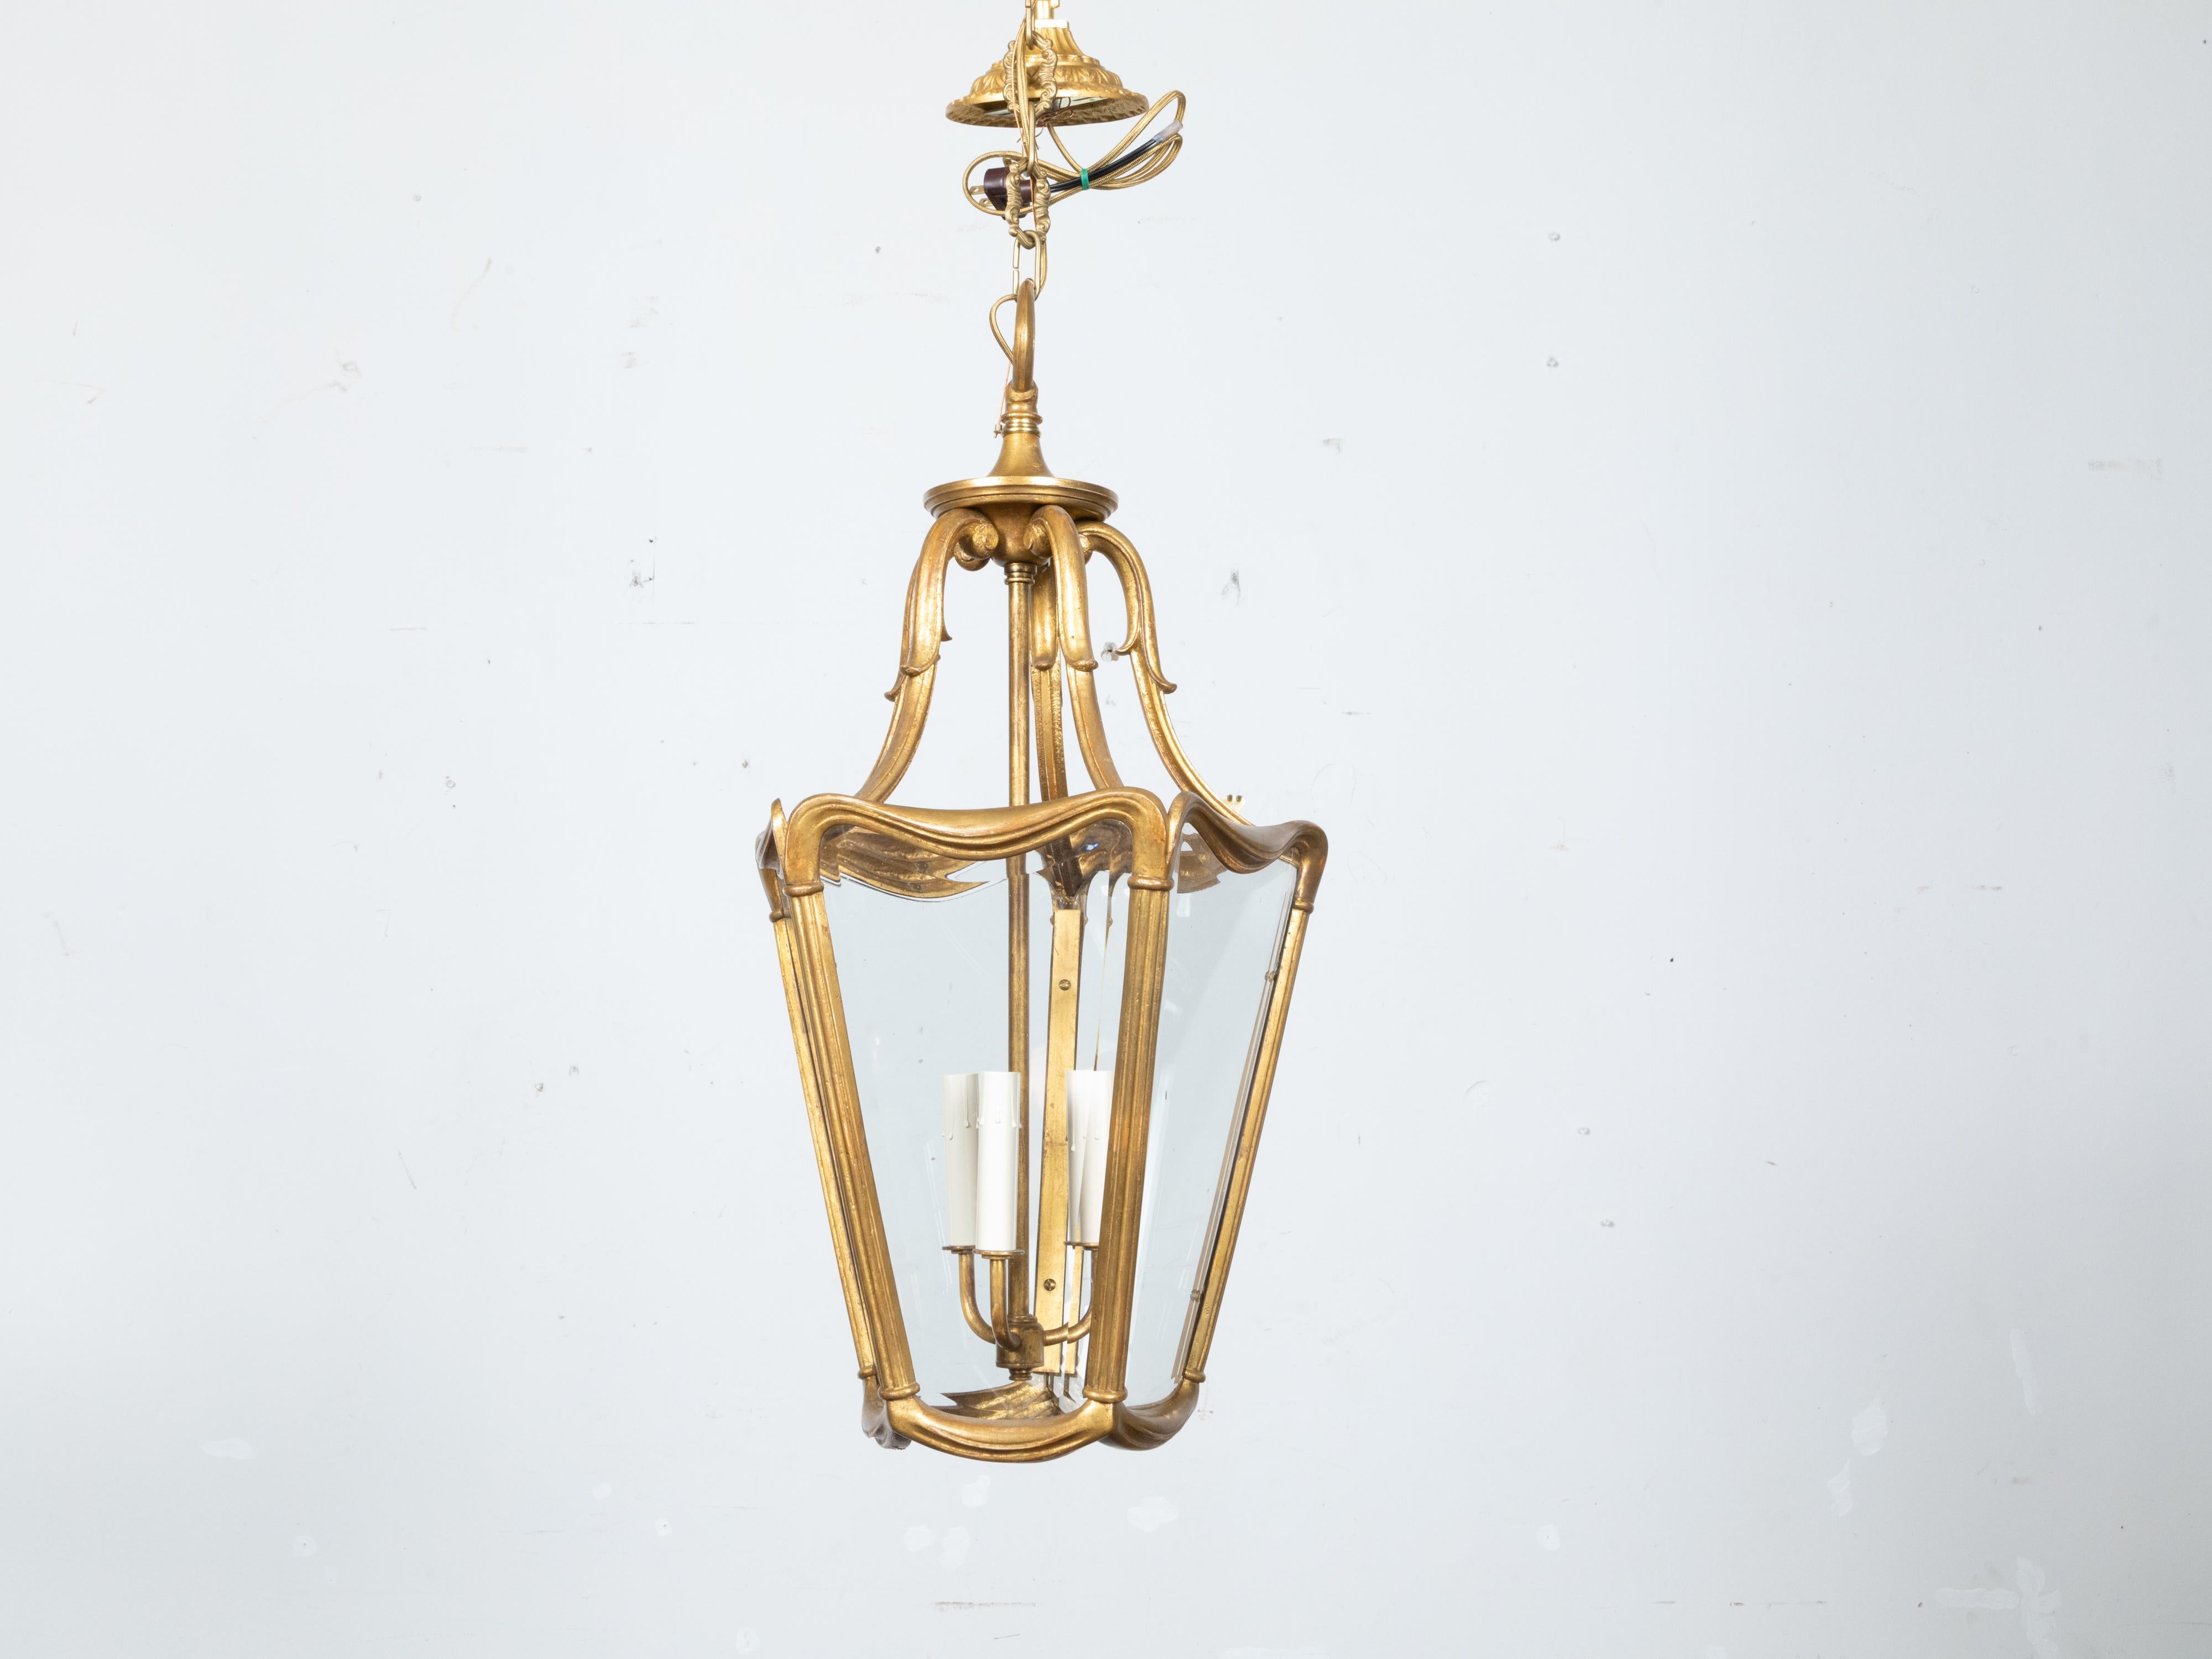 20th Century Art Nouveau Style Gilt Metal Three-Light Lantern with Subtle Scrolling Effects For Sale